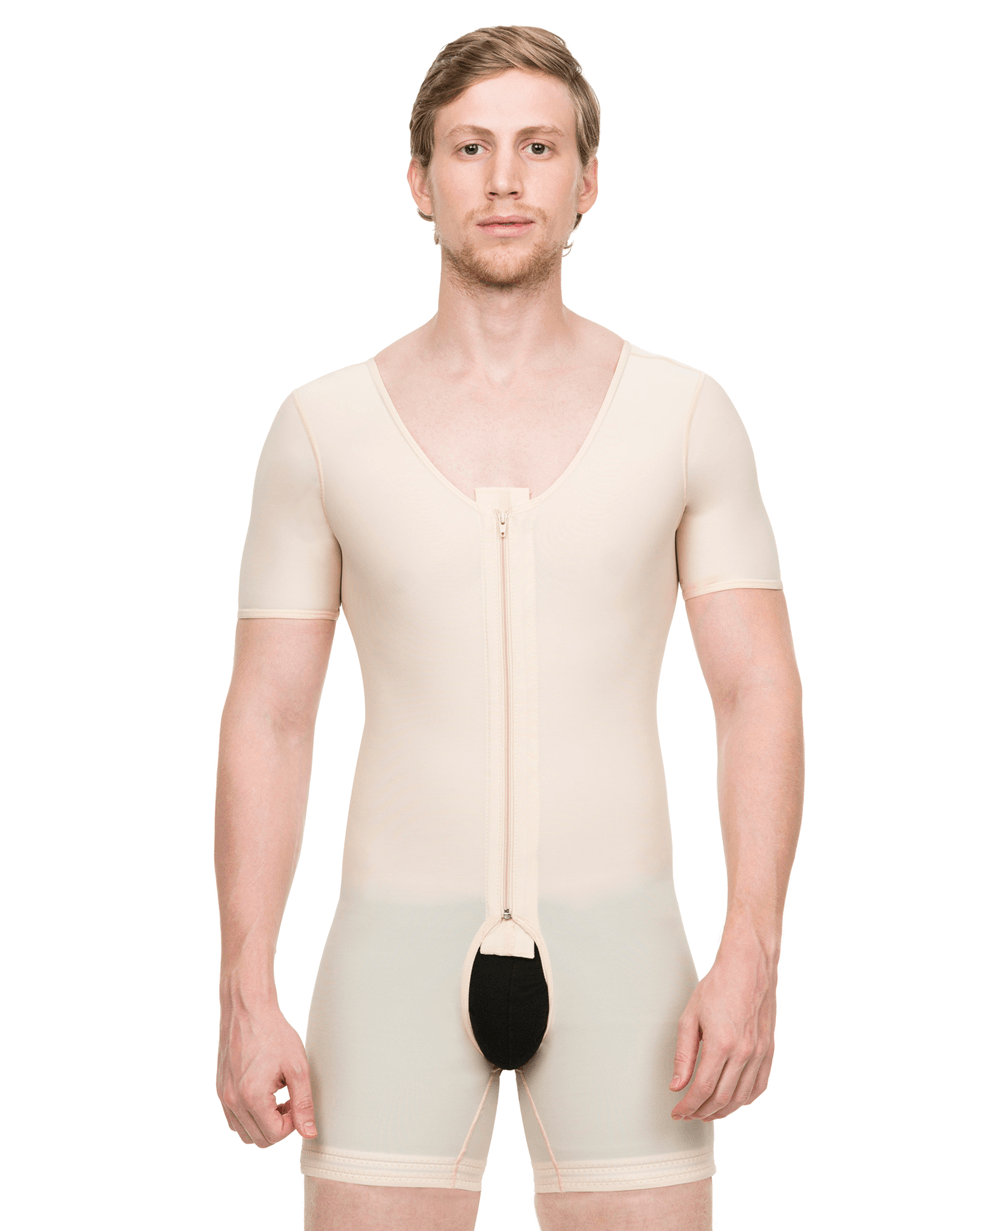 ABDOMINAL POST-SURGICAL COMPRESSION GARMENT - EXTENDED BACK WITH